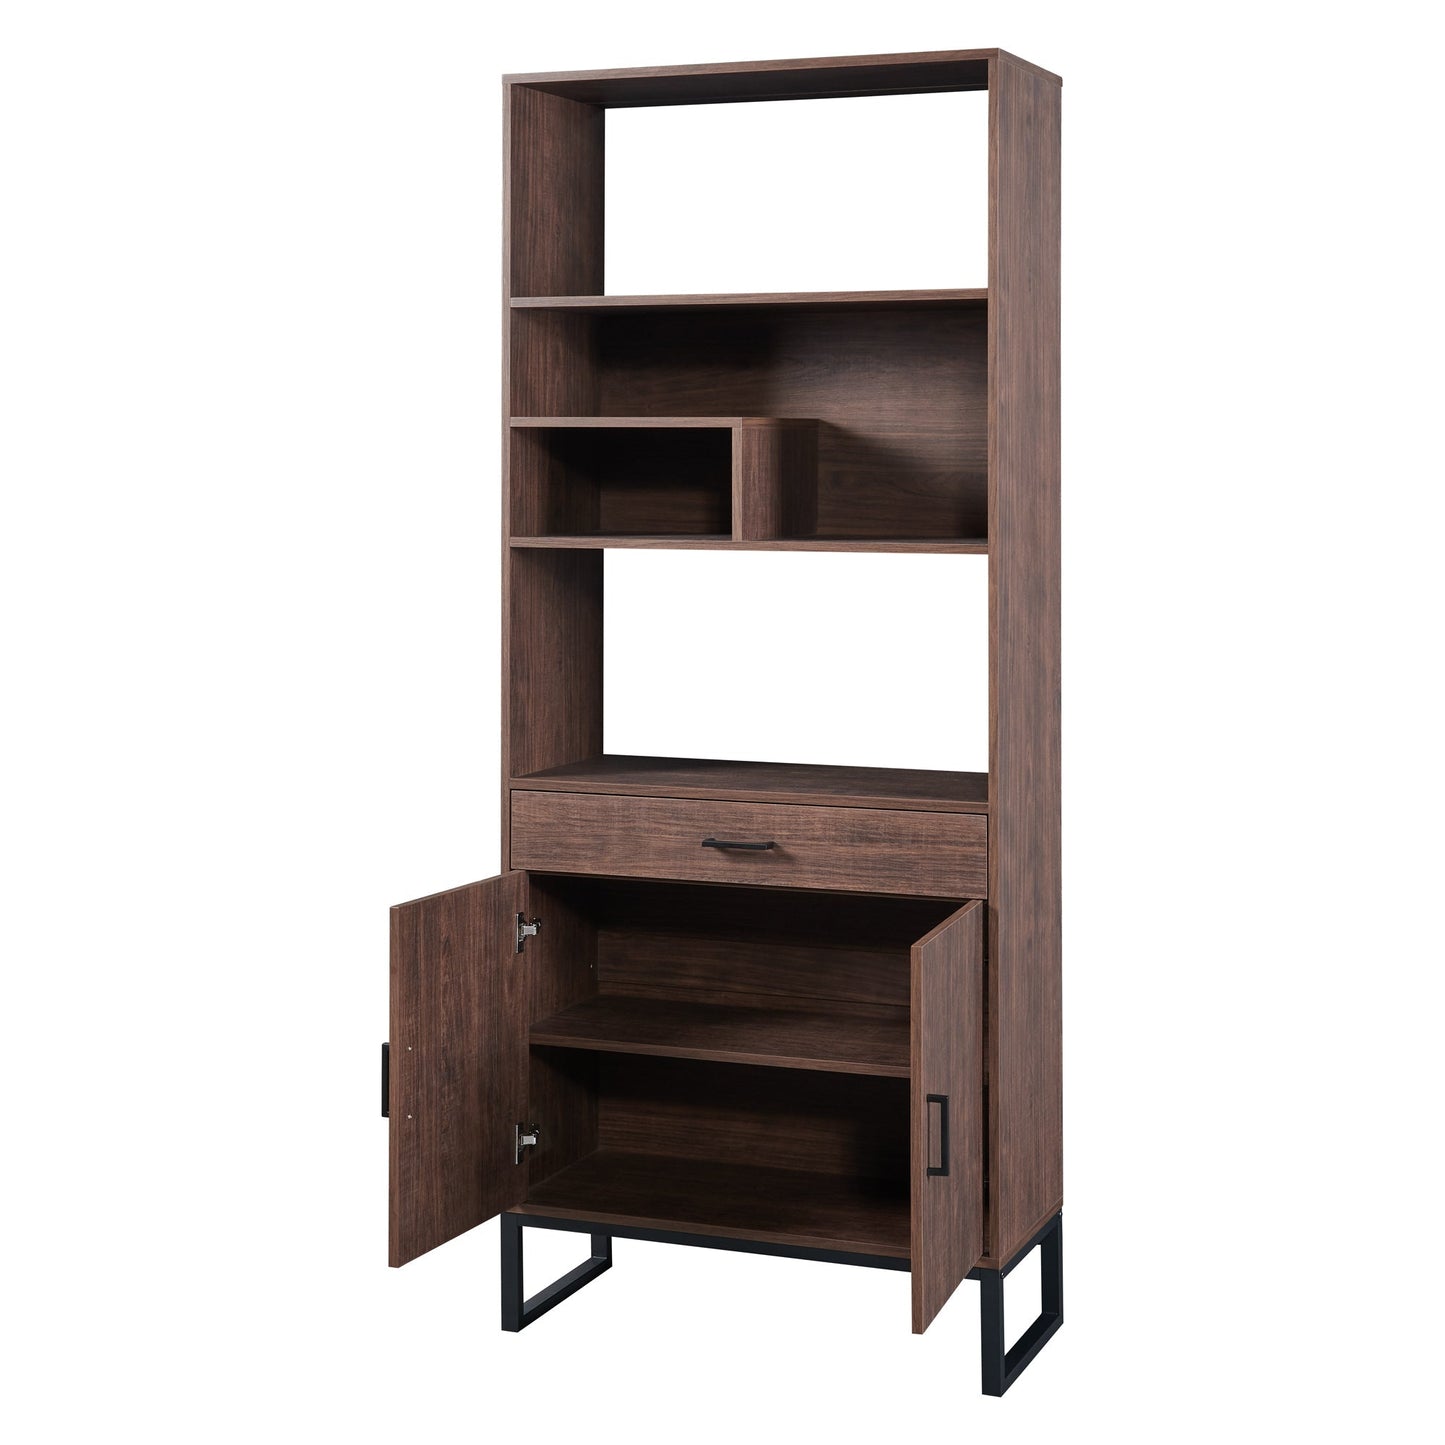 75.9"Modern Open Bookshelf with Doors, Bookcase with Storage drawer and LED Strip Lights,Free Standing Display Rack,Wooden Tall Bookshelf for Living Room and Office, Walnut